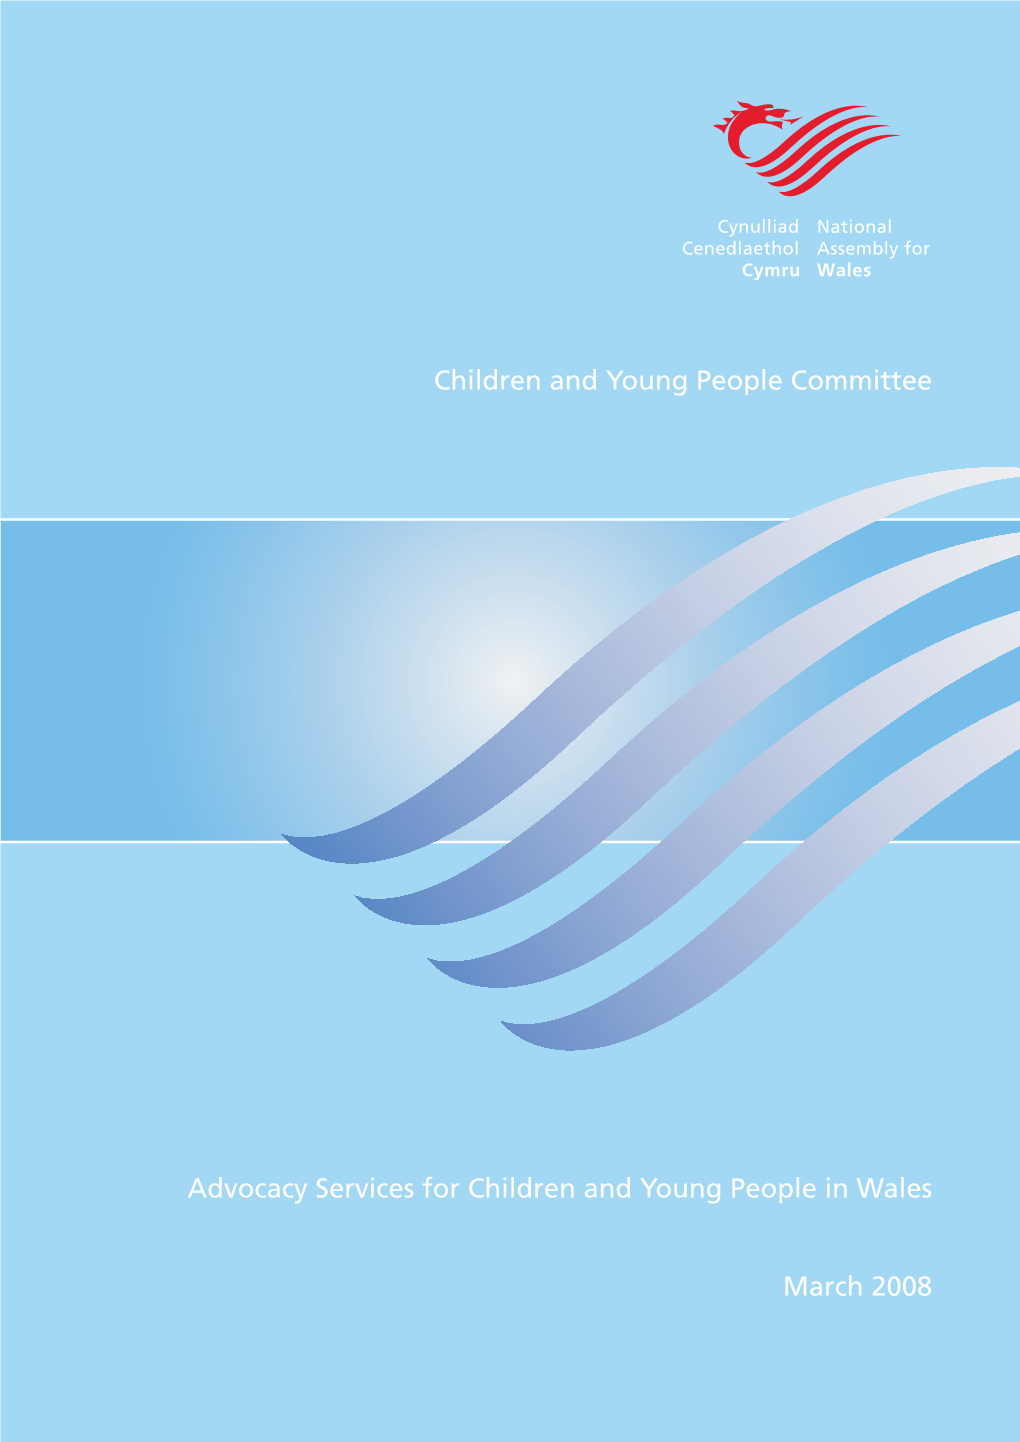 Advocacy Services for Children and Young People in Wales